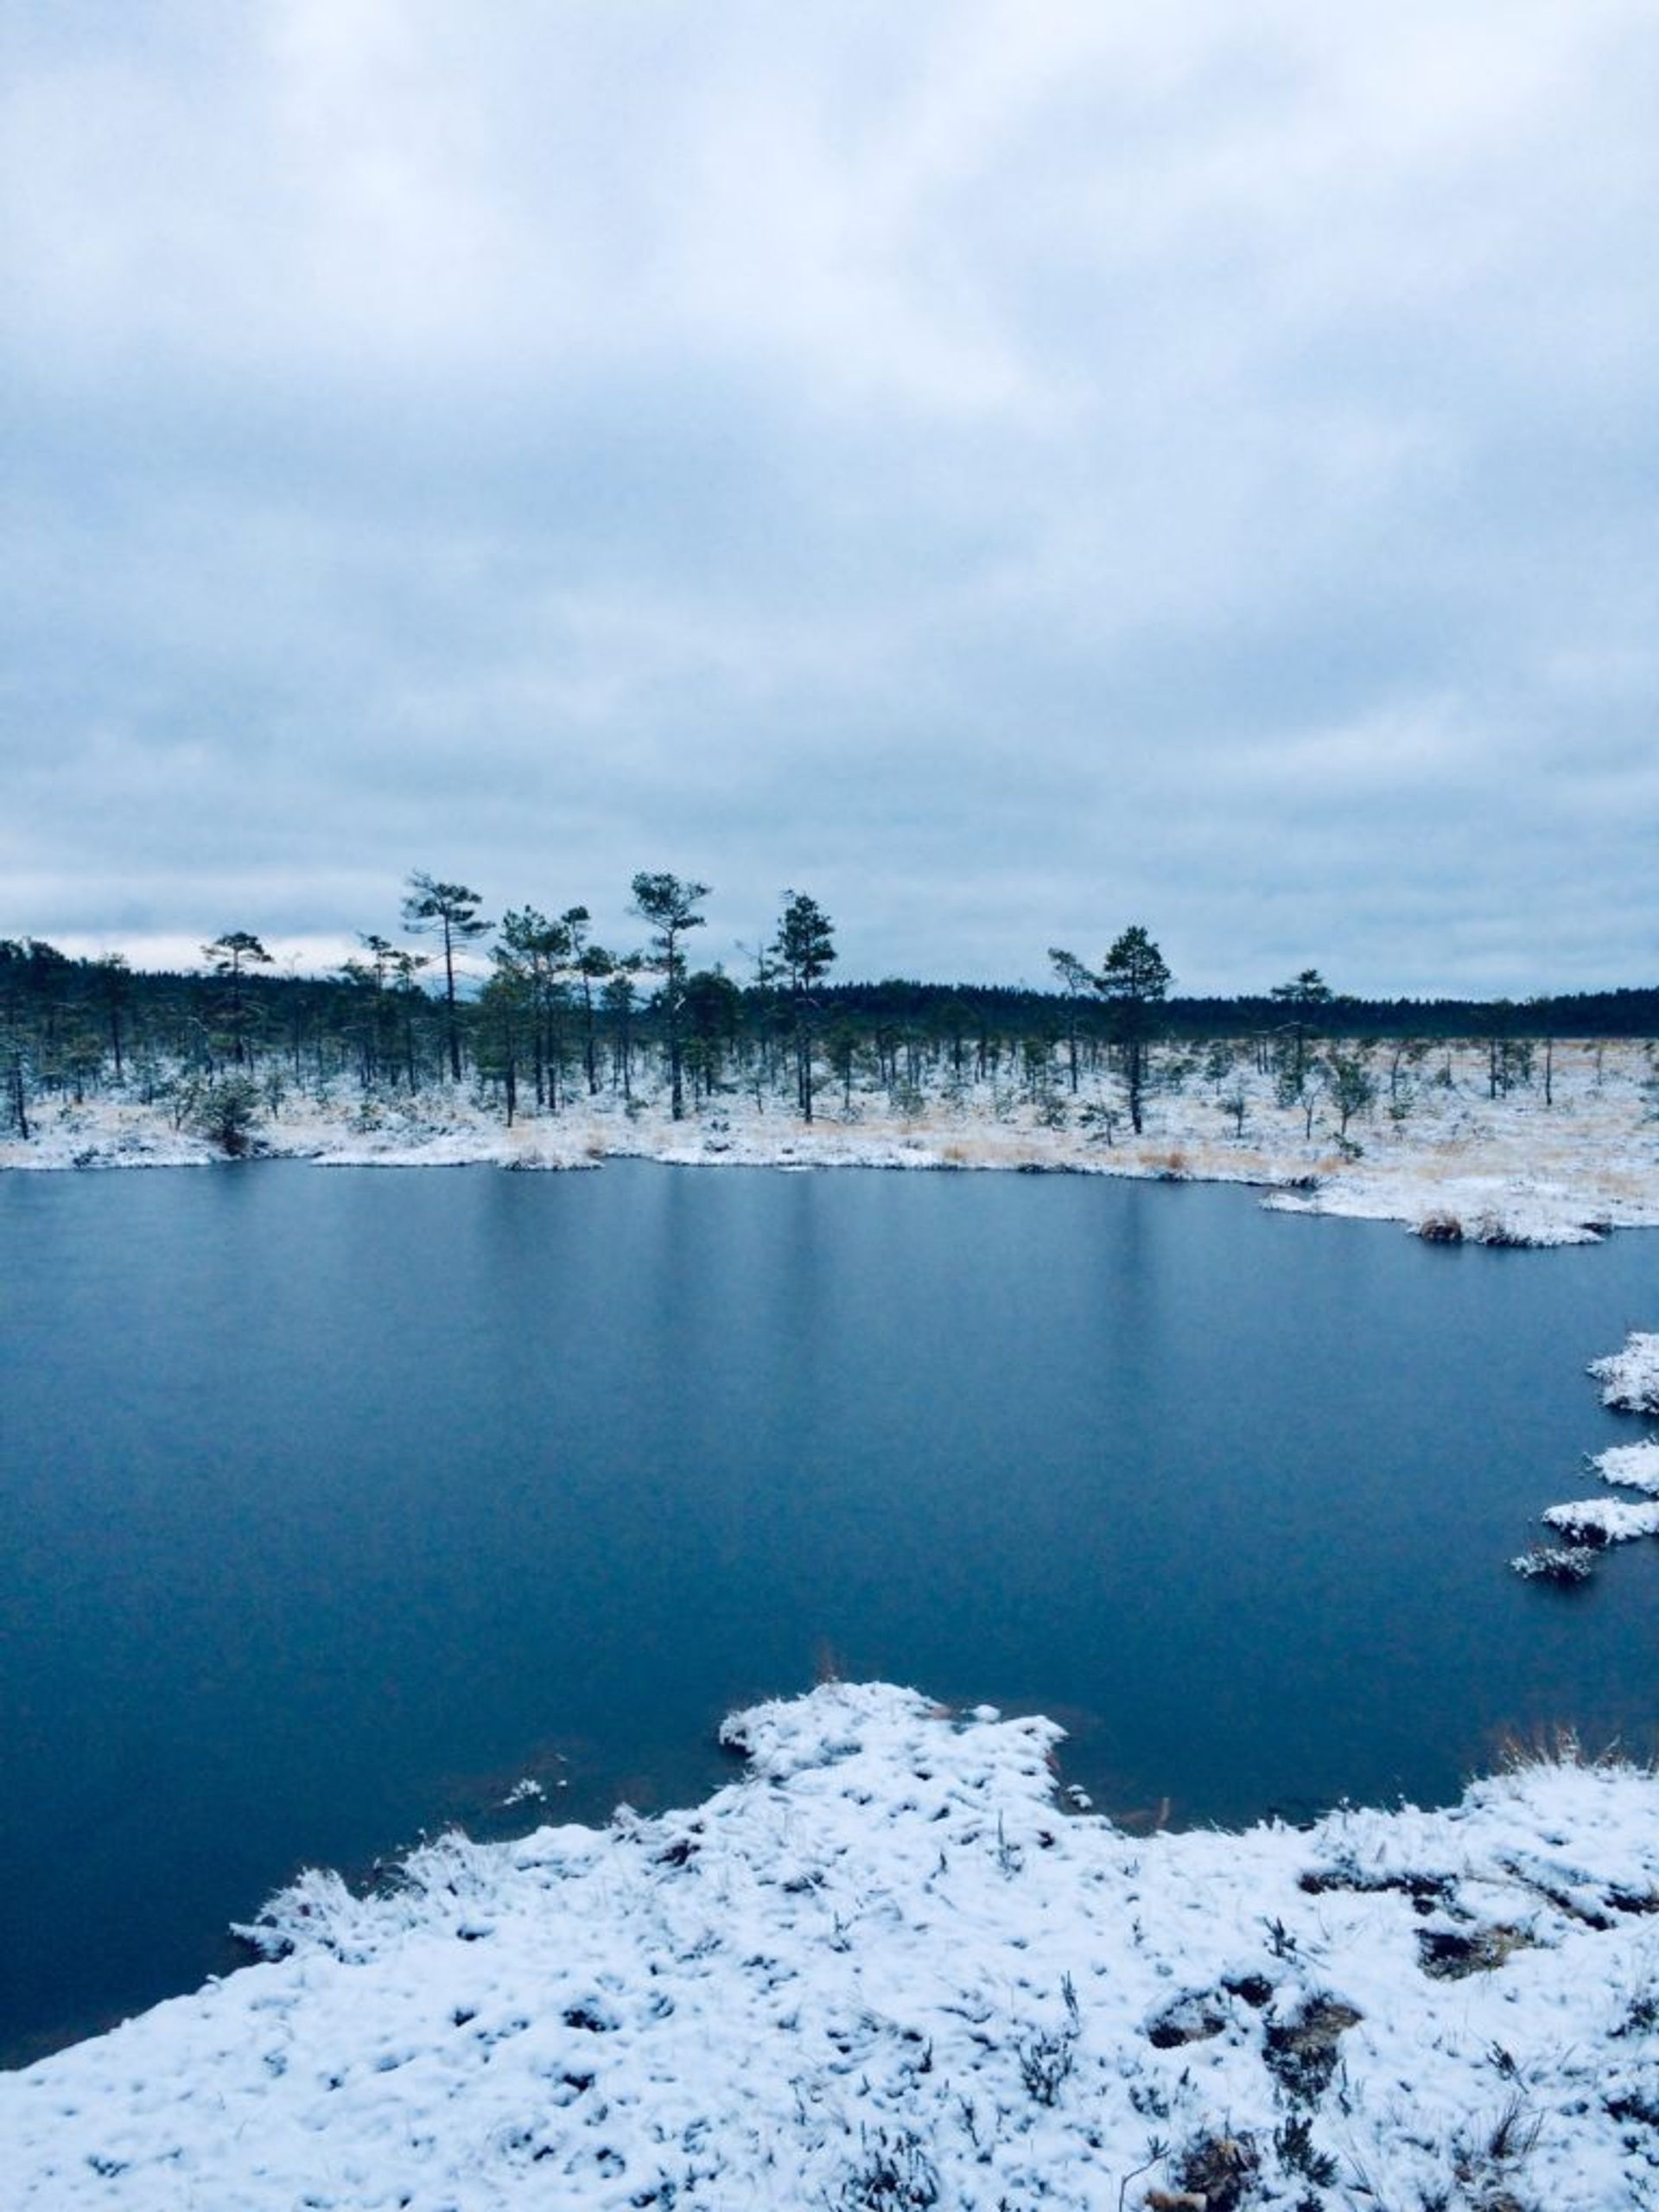 A lake in winter.